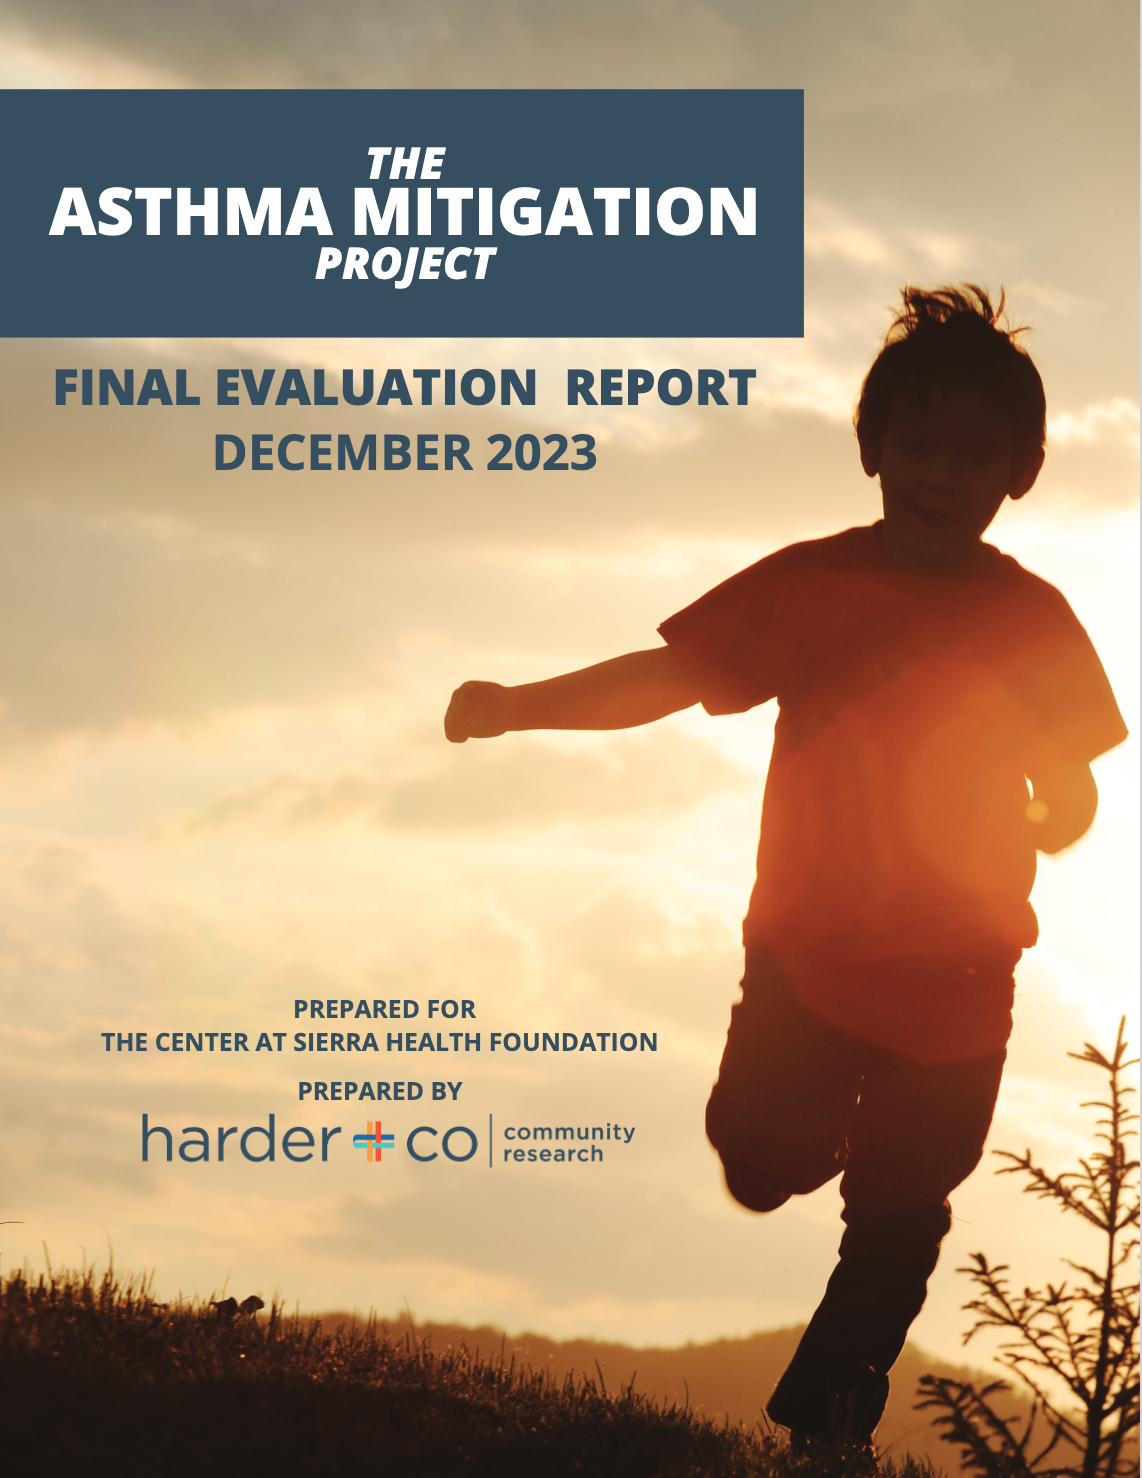 Pictured:  Cover of The Asthma Mitigation Project Final Evaluation Report, December 2023